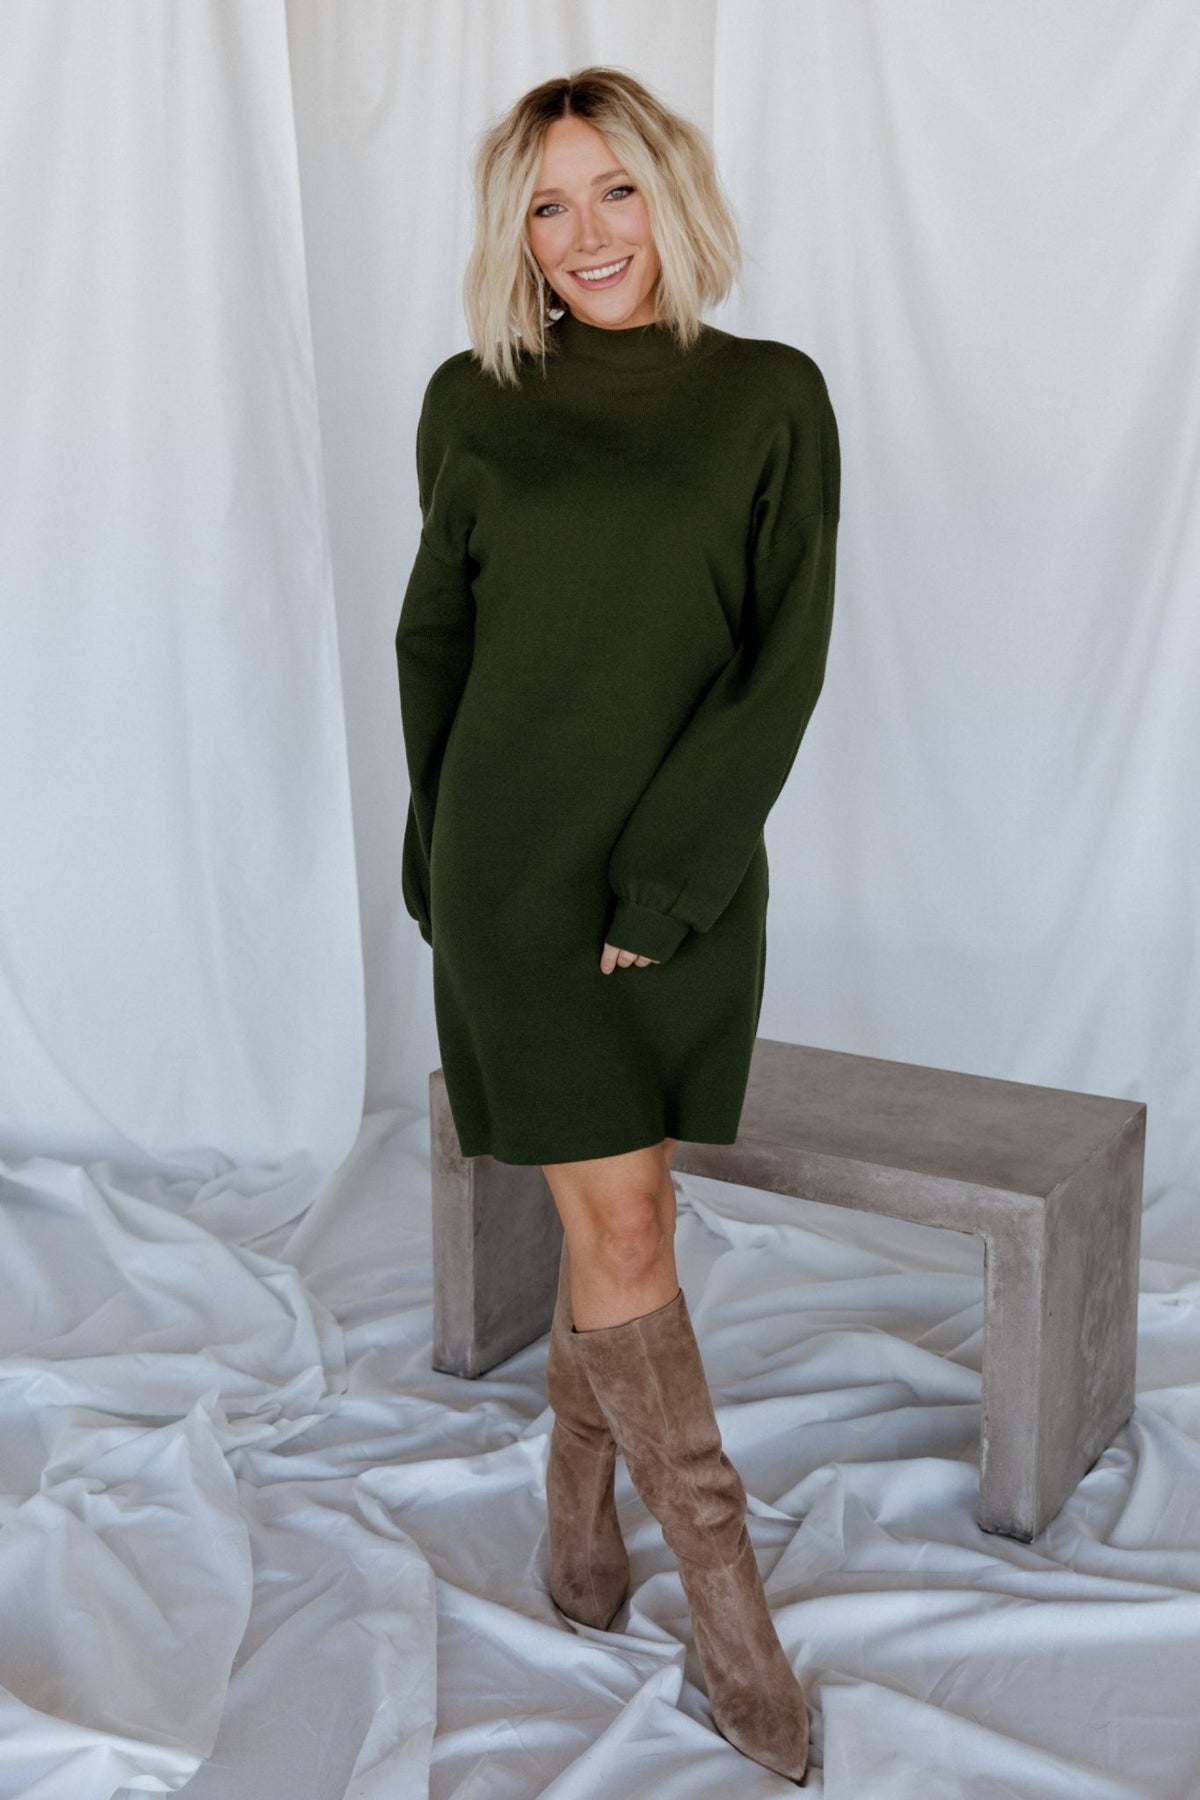 11 Bump-Friendly Sweater Dresses: Stretchy, Comfy, Chic - The Mom Edit